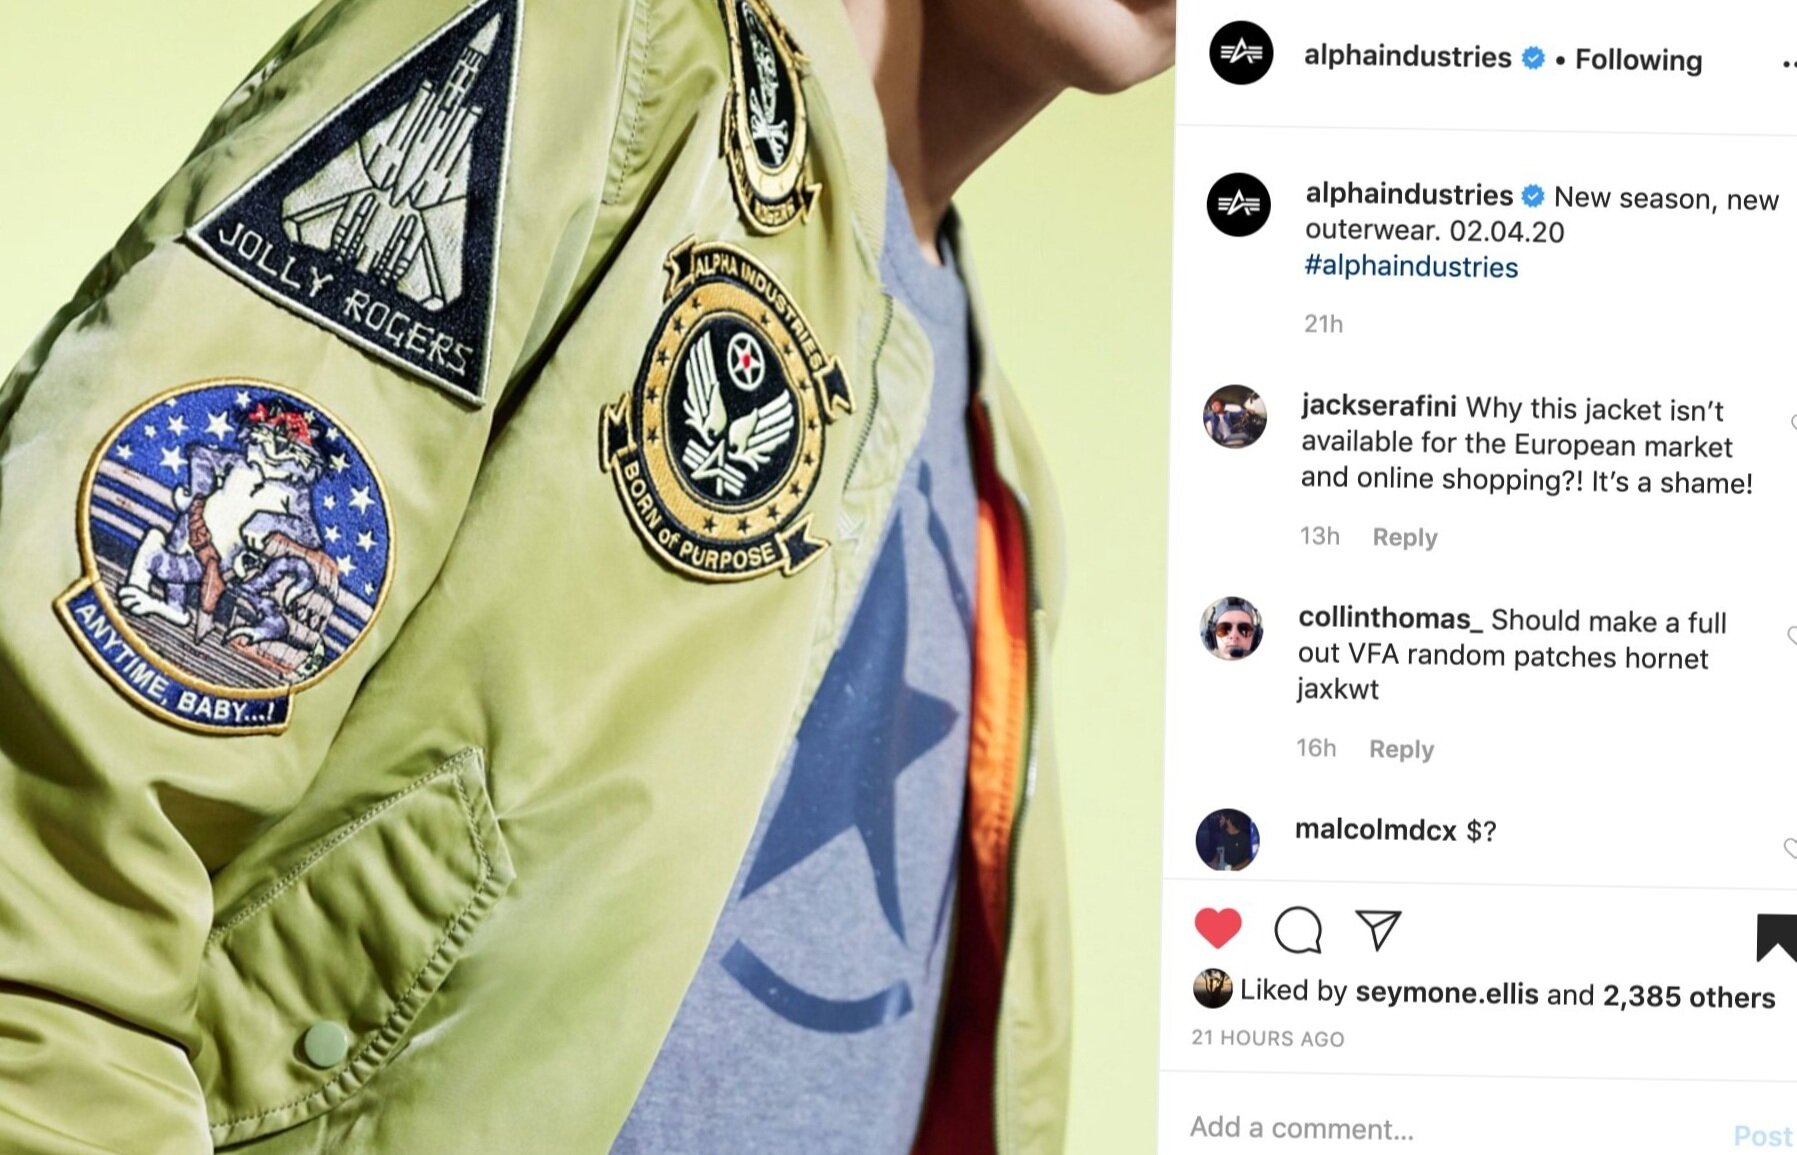 AS FEATURED ON @ALPHAINDUSTRIES 